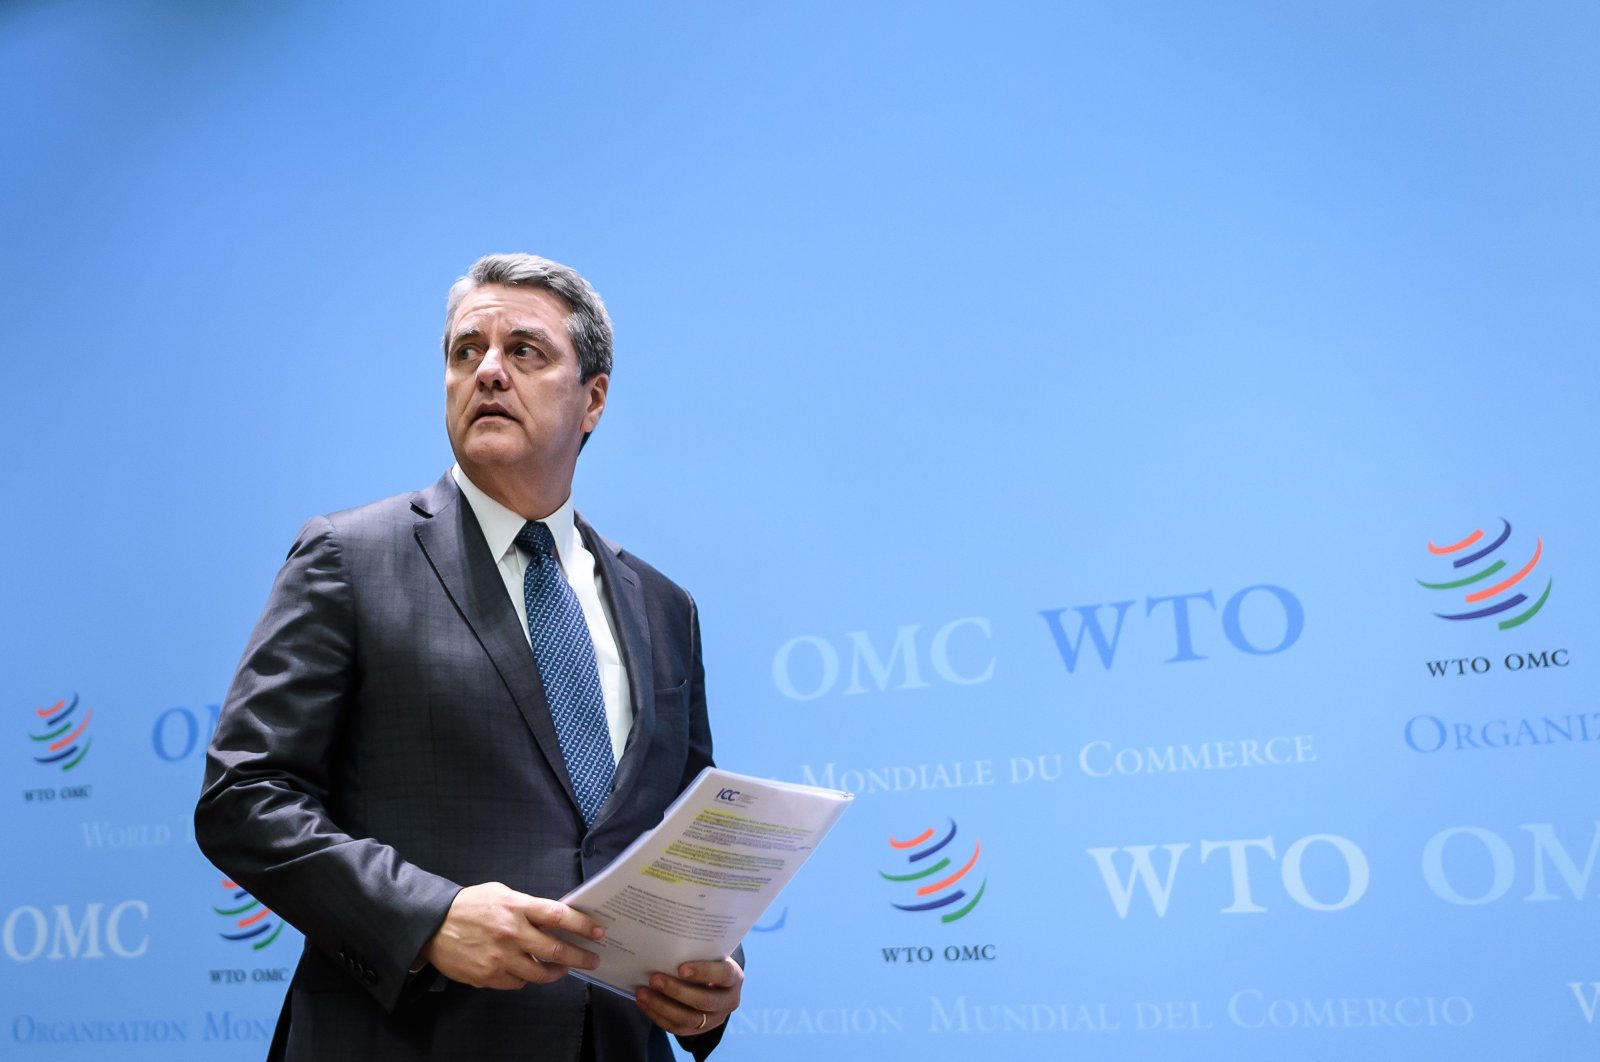 World Trade Organization (WTO) Director General Roberto Azevedo arrives to address a press conference following a WTO general council meeting, Geneva, Dec. 10, 2019. (AFP Photo)